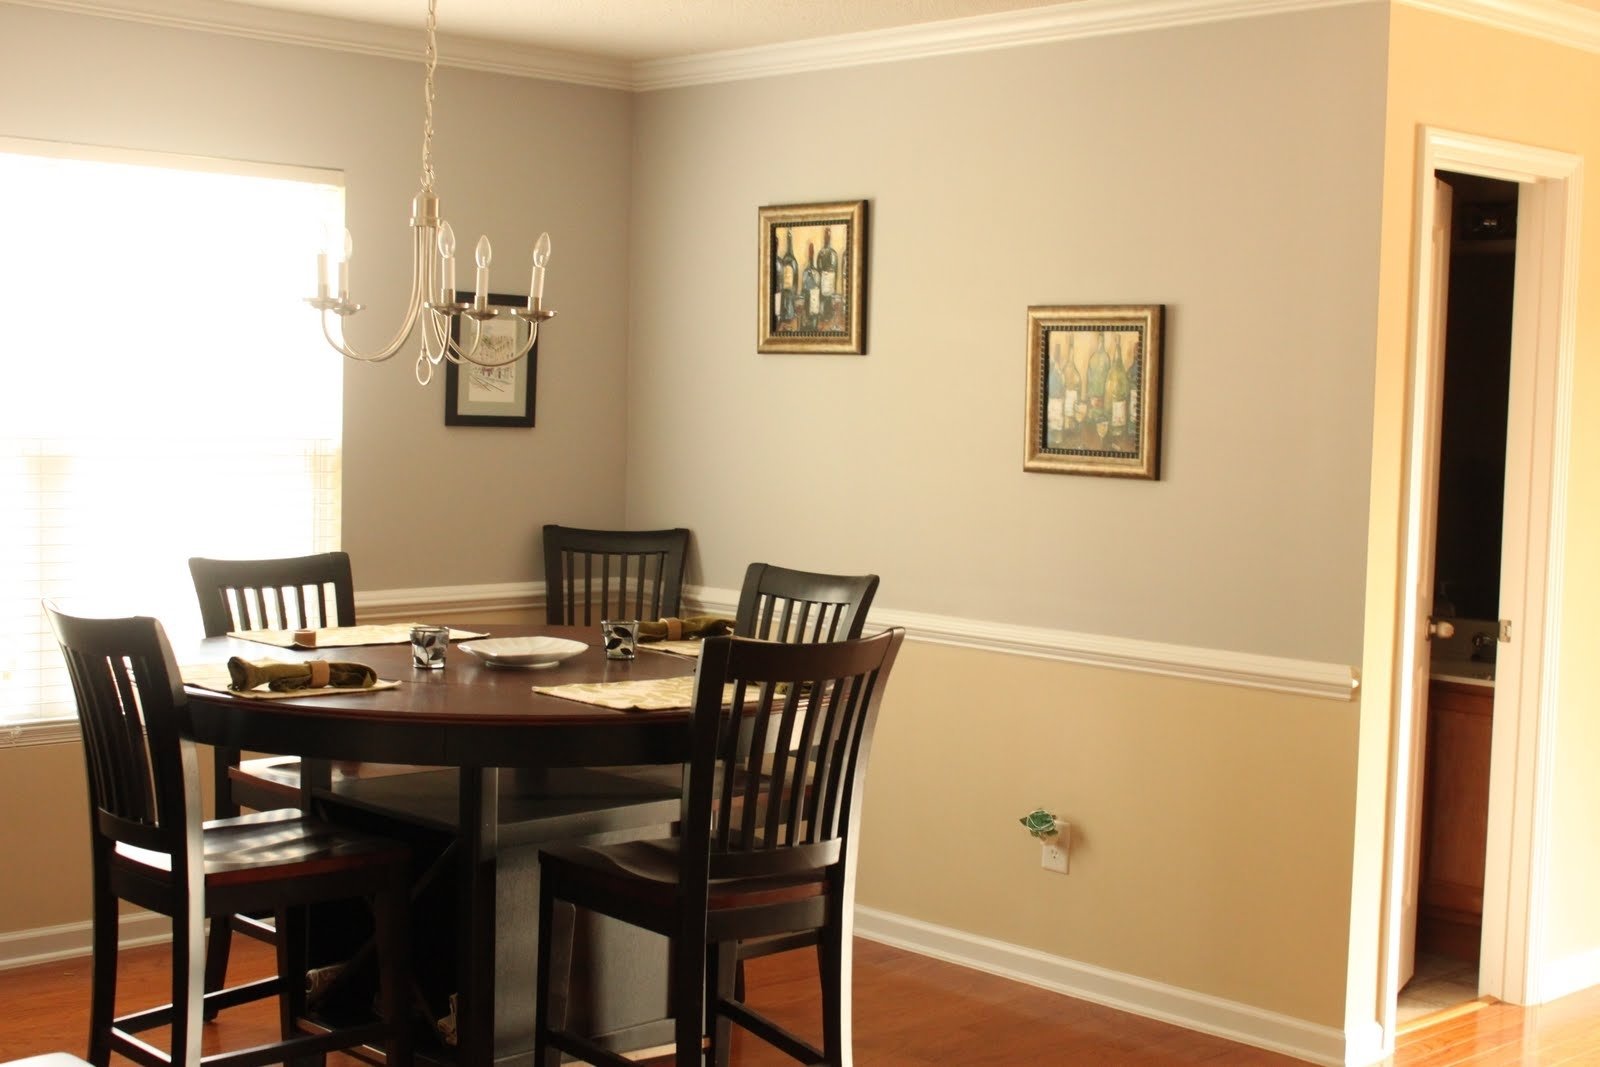 10 Unique Dining Room Paint Color Ideas dining room paint colors ideas impressive with photos of dining room 2022